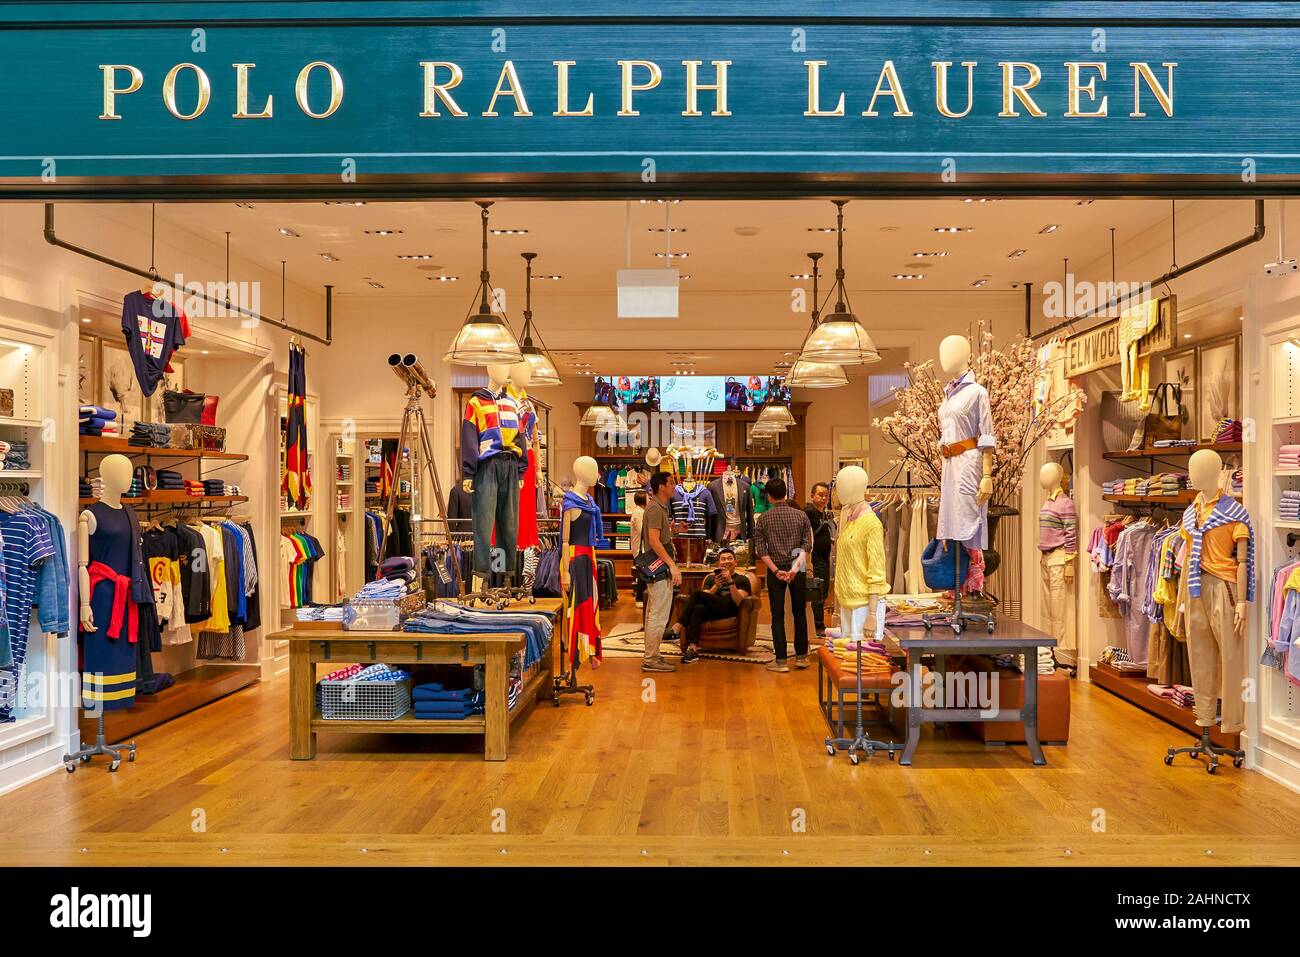 SINGAPORE - CIRCA APRIL, 2019: Polo Ralph Lauren brand name over store  entrance in the Shoppes at Marina Bay Sands Stock Photo - Alamy